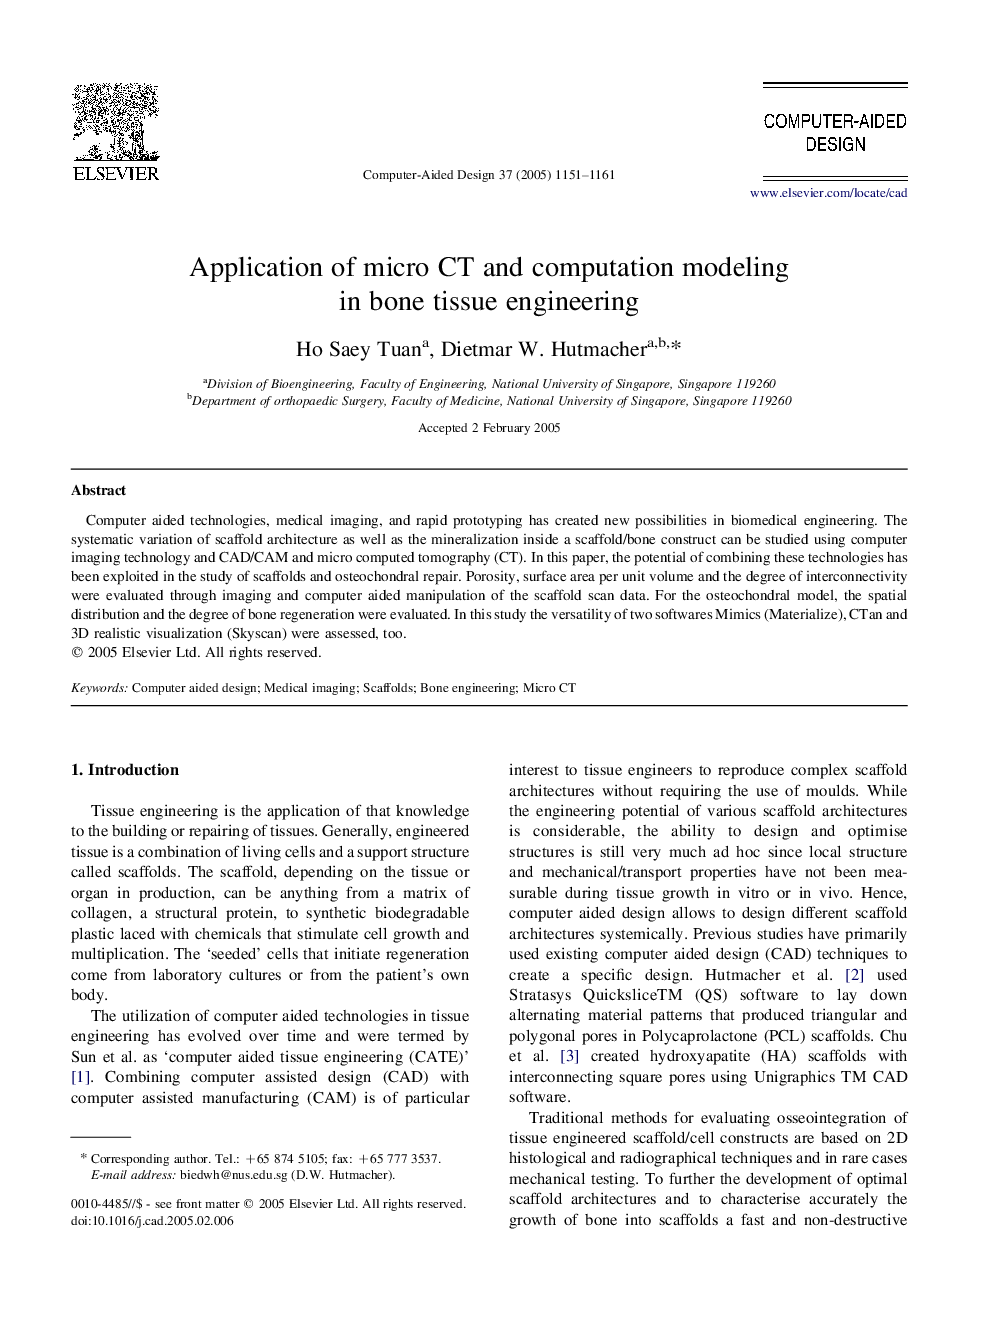 Application of micro CT and computation modeling in bone tissue engineering